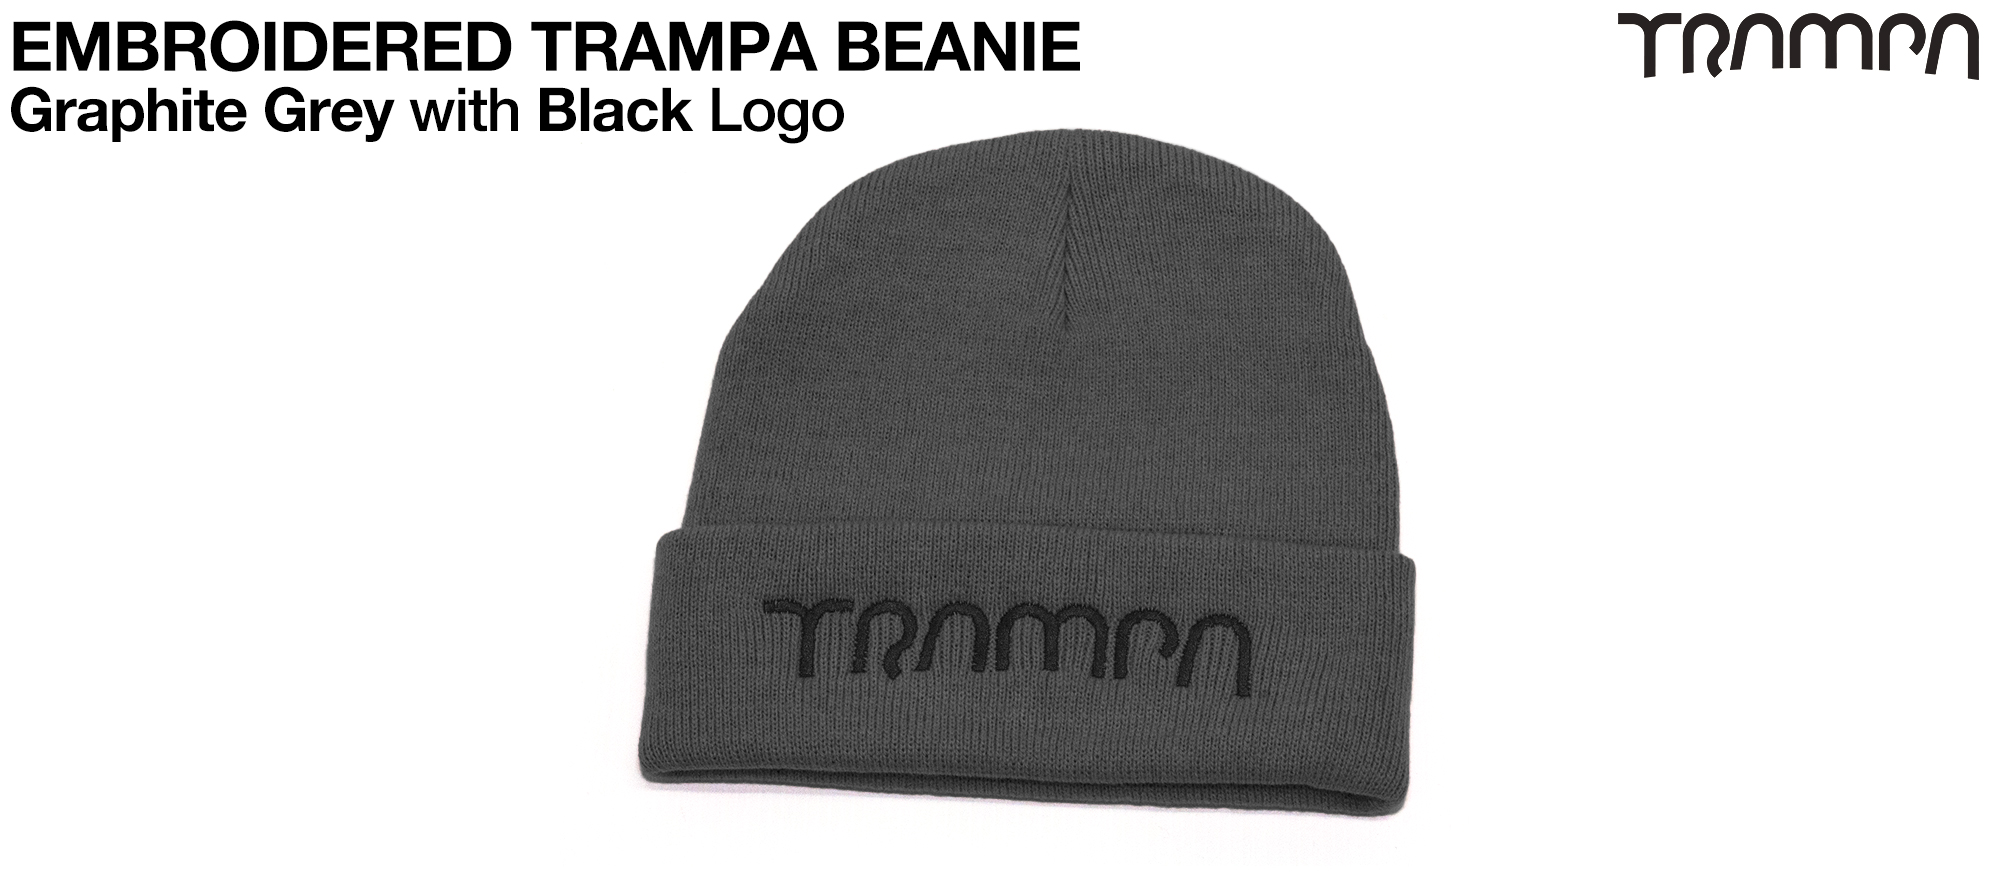 Graphite GREY Beanie with EMBROIDERED TRAMPA logo 